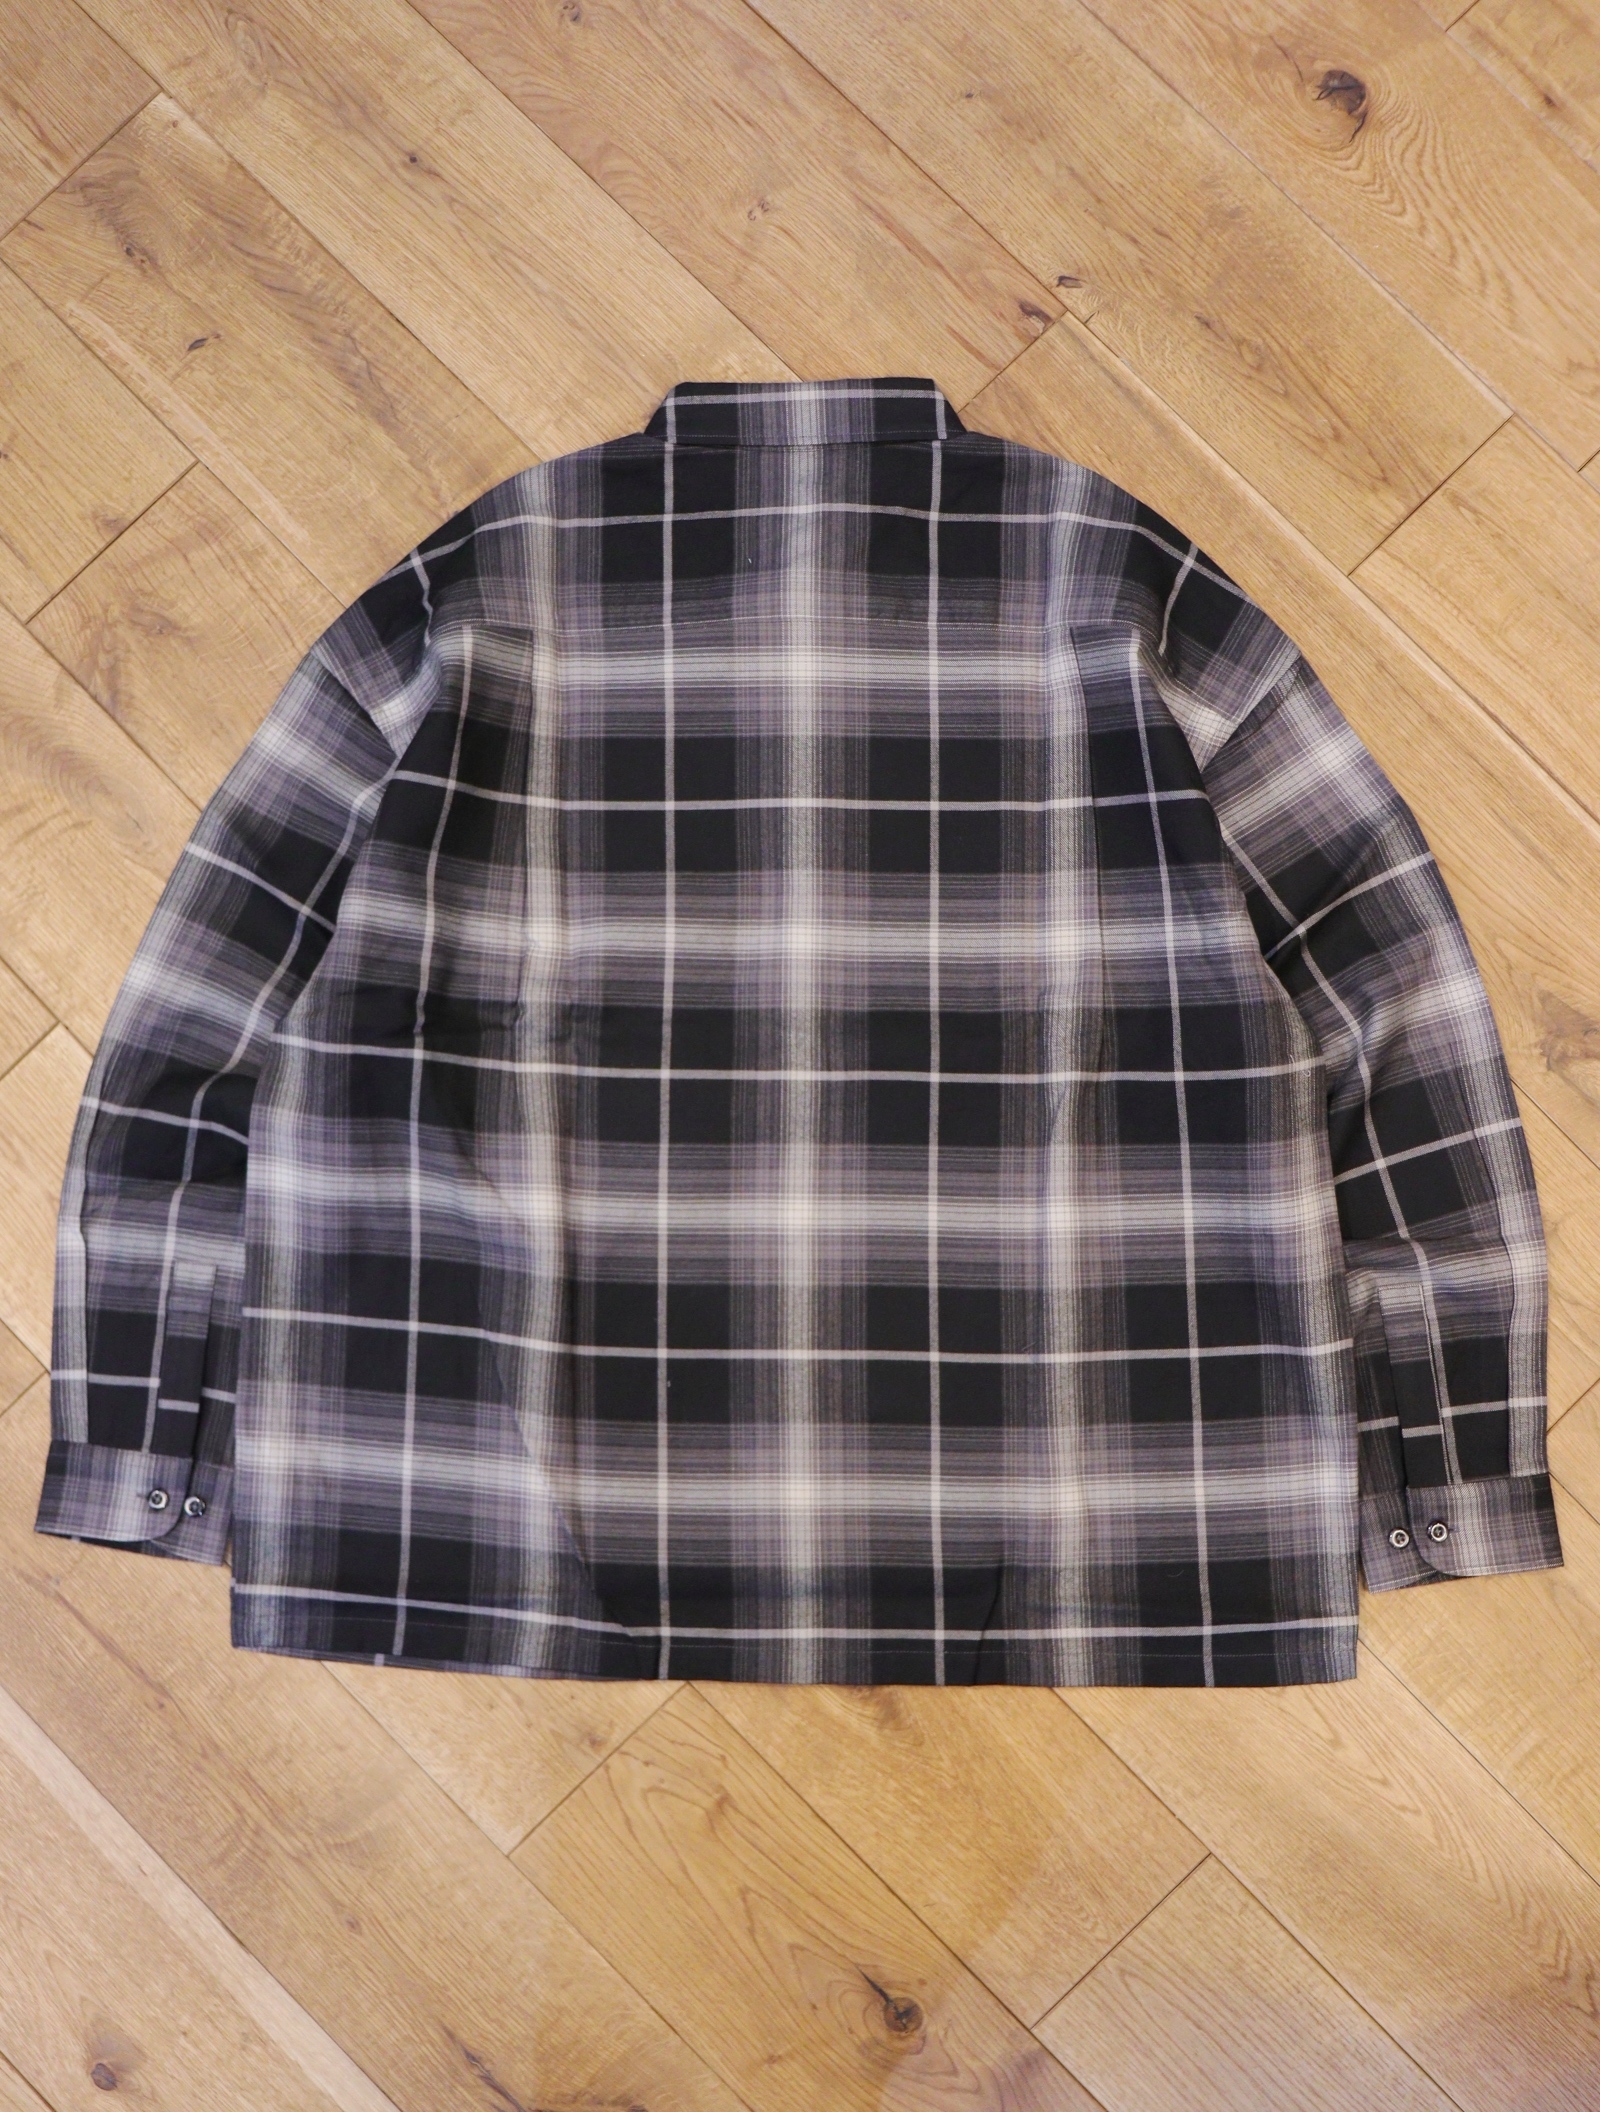 COOTIE 「R/C Ombre Check L/S Shirt」 オンブレチェックワークシャツ